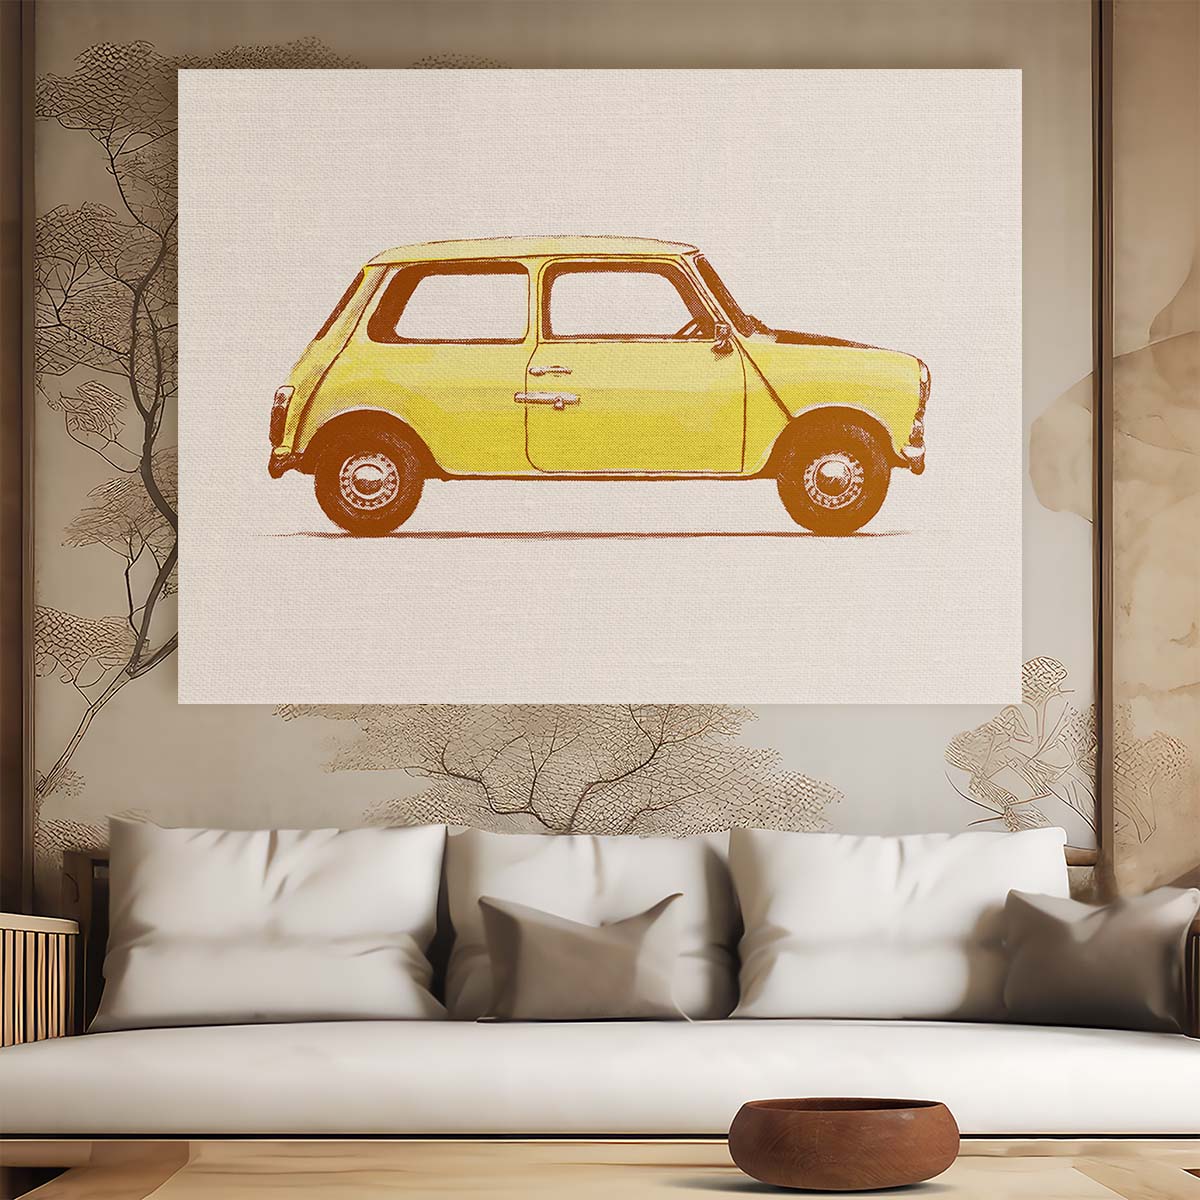 Vintage Classic Mini Mr. Bean's Yellow Car Wall Art by Luxuriance Designs. Made in USA.